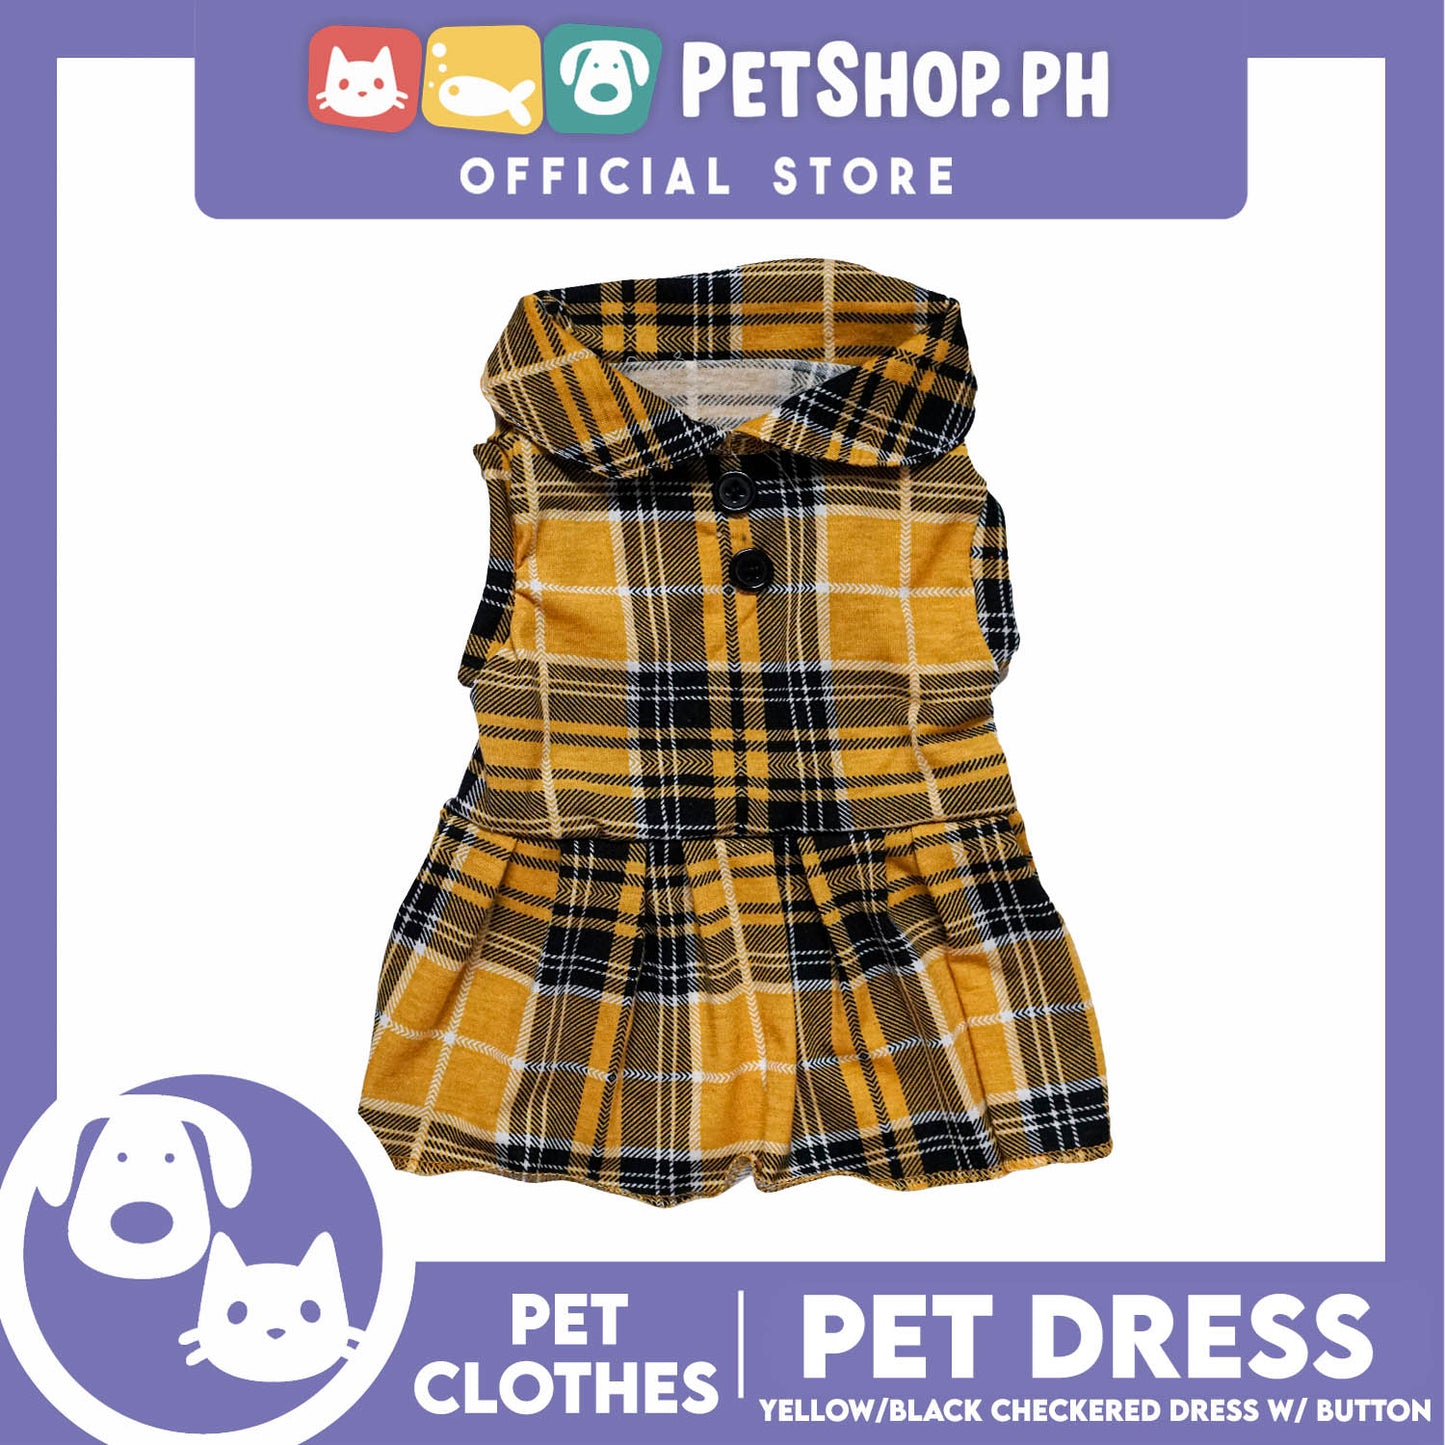 Pet Dress Checkered Yellow and Black with Button (Medium) Perfect Fit for Dogs and Cats